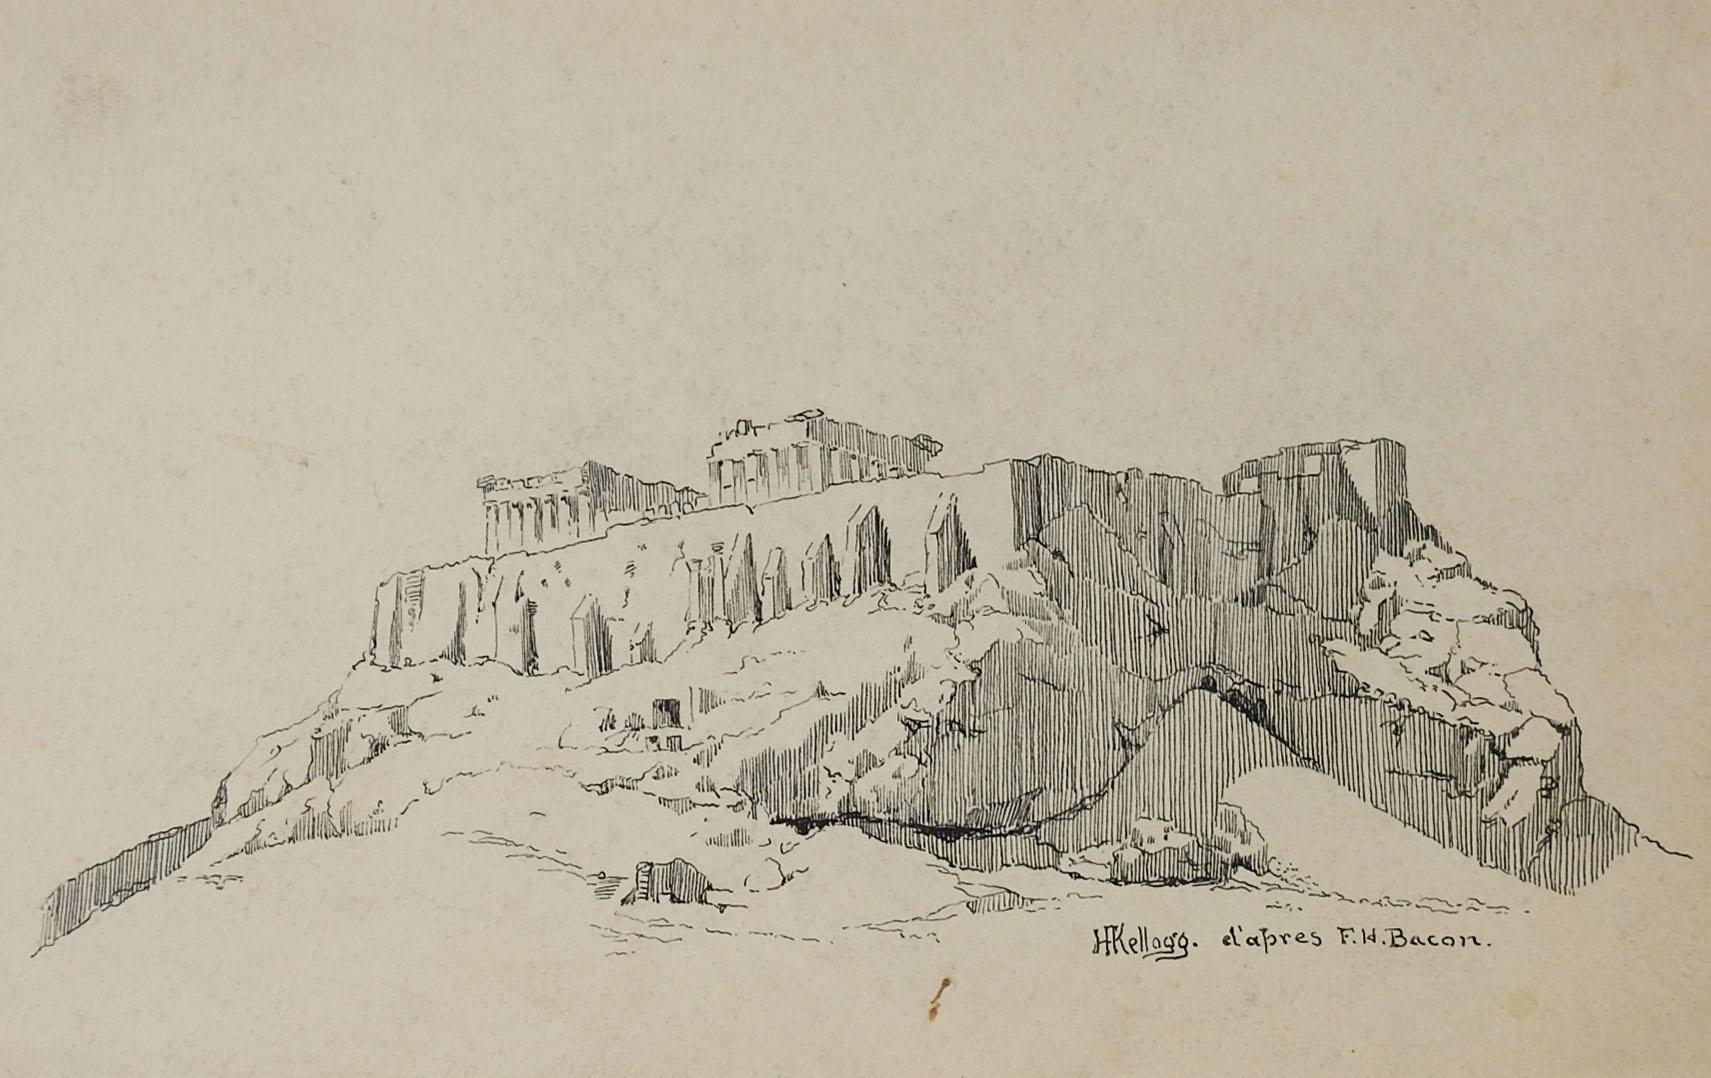 Antique circa 1900 pen and ink drawing on on paper of the Acropolis of Athens Greece. Signed H. Kellogg, d'apres F. W. Bacon. Unframed, age toning, edge wear.